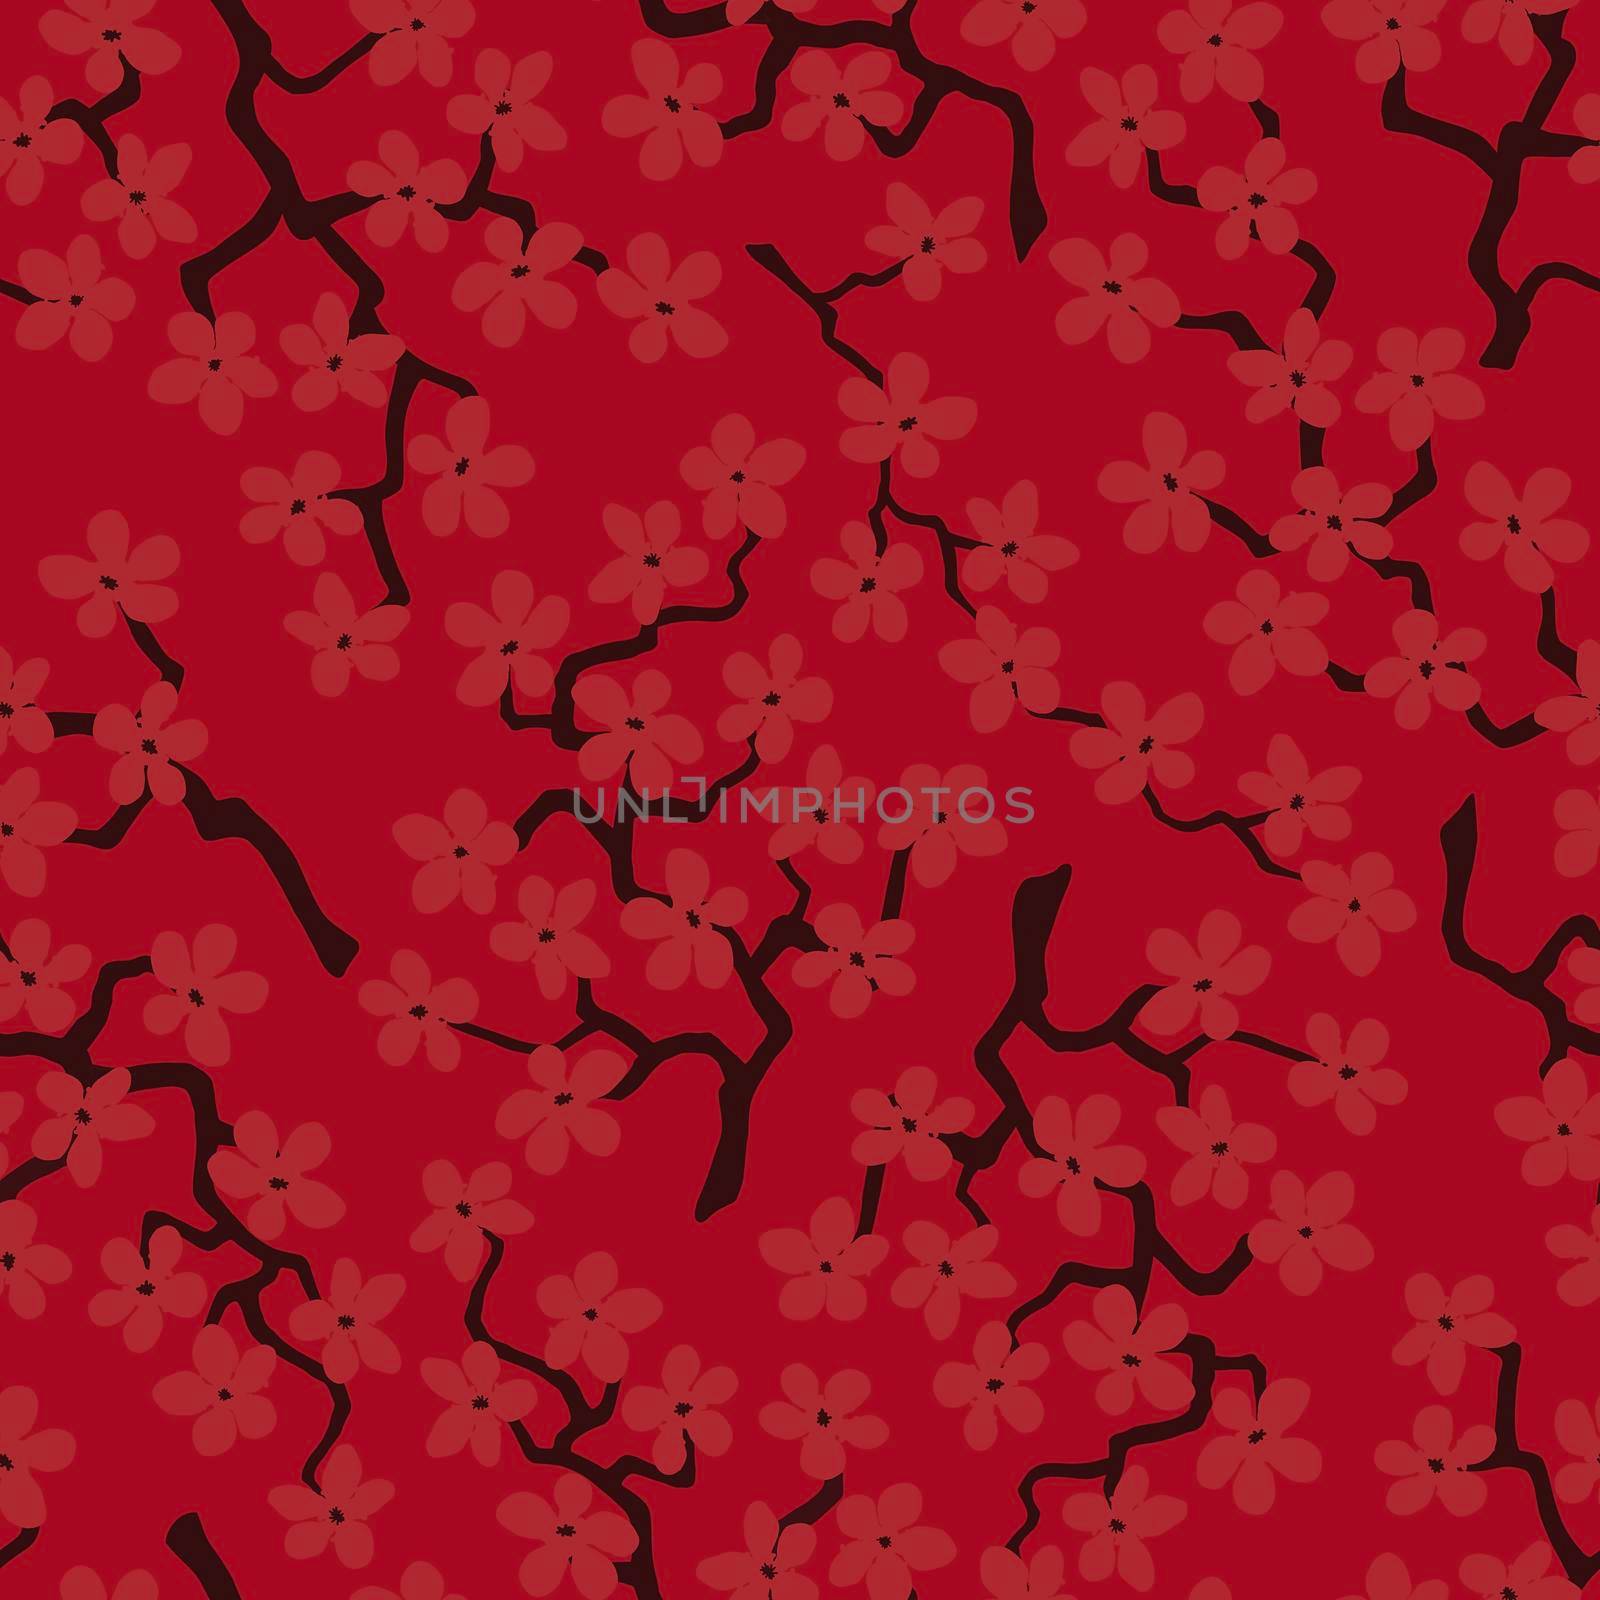 Seamless pattern with blossoming Japanese cherry sakura branches for fabric,packaging,wallpaper, textile decor, design, invitations,print, gift wrap, manufacturing.Terracotta flowers on red background